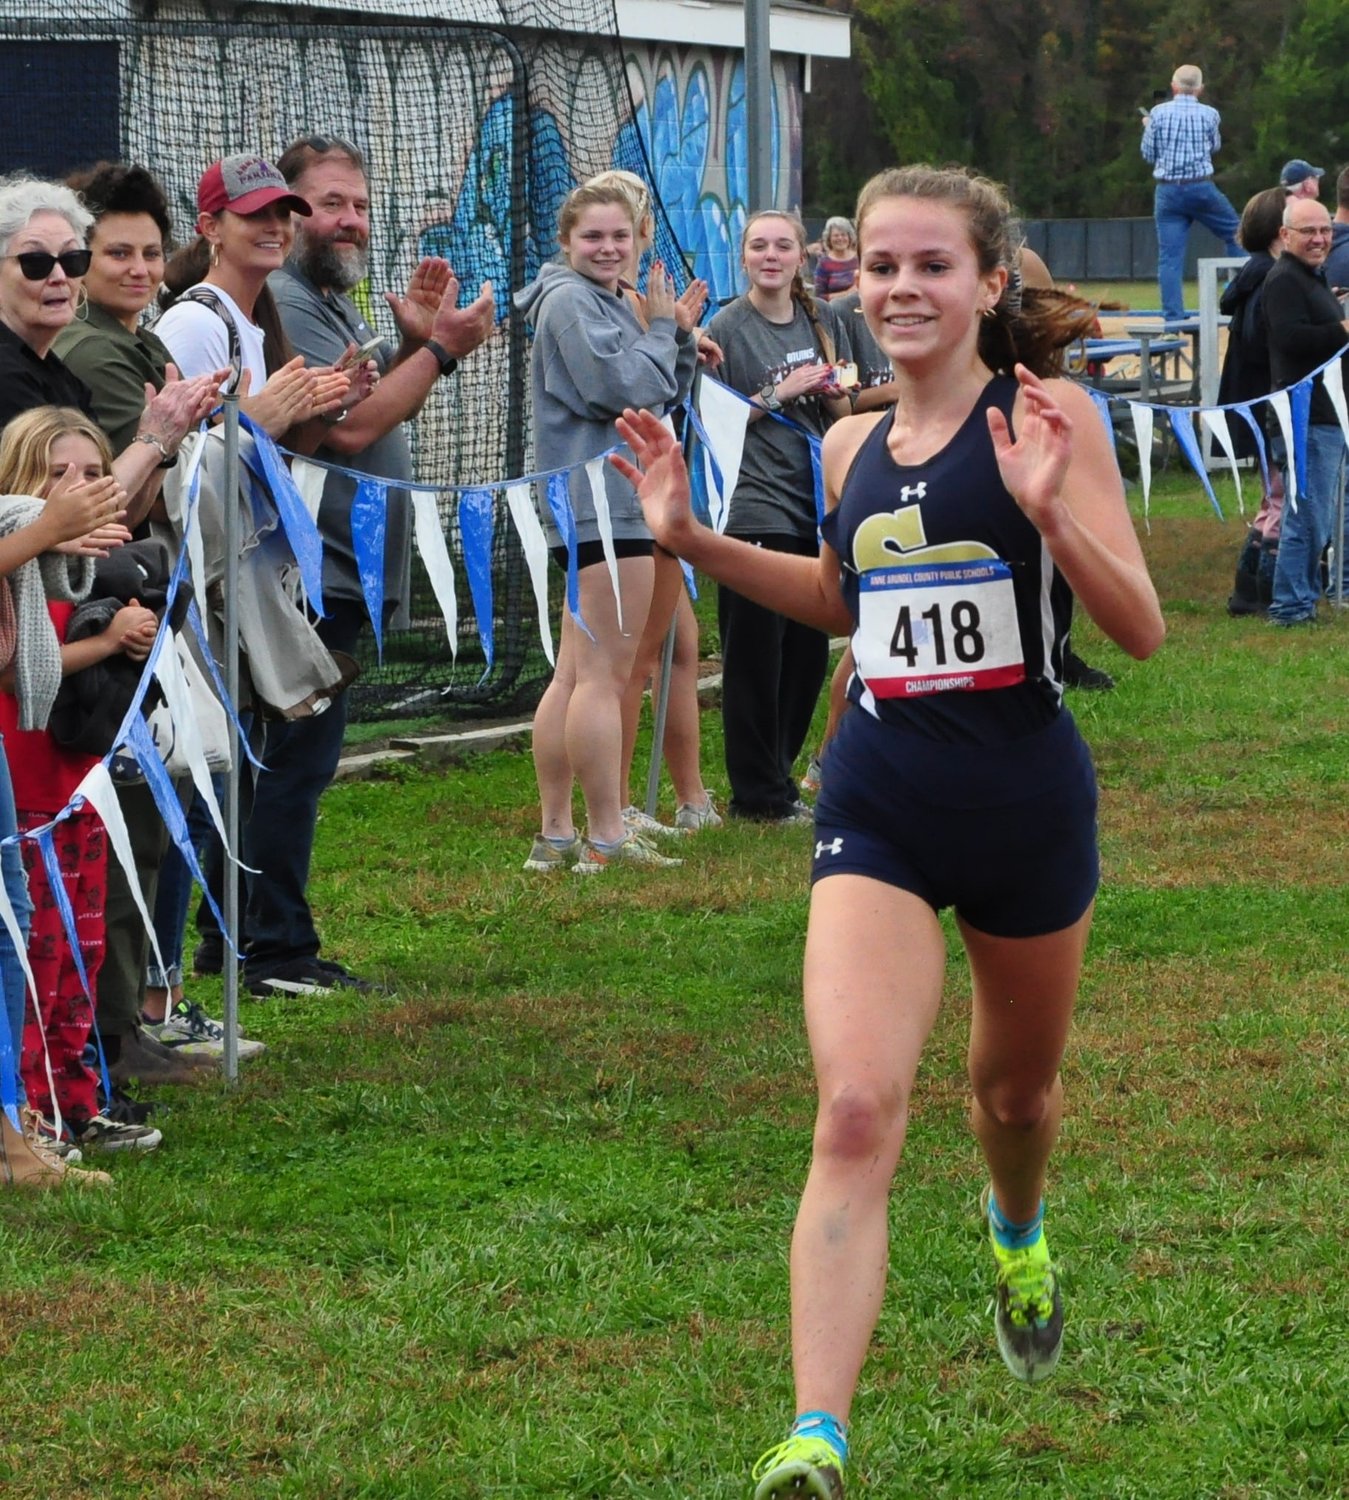 Severna Park High School senior Cami Glebocki took first place in the county cross country championships at South River High School in Edgewater on October 26. Glebocki ran the 3-mile course in 19:09.5.